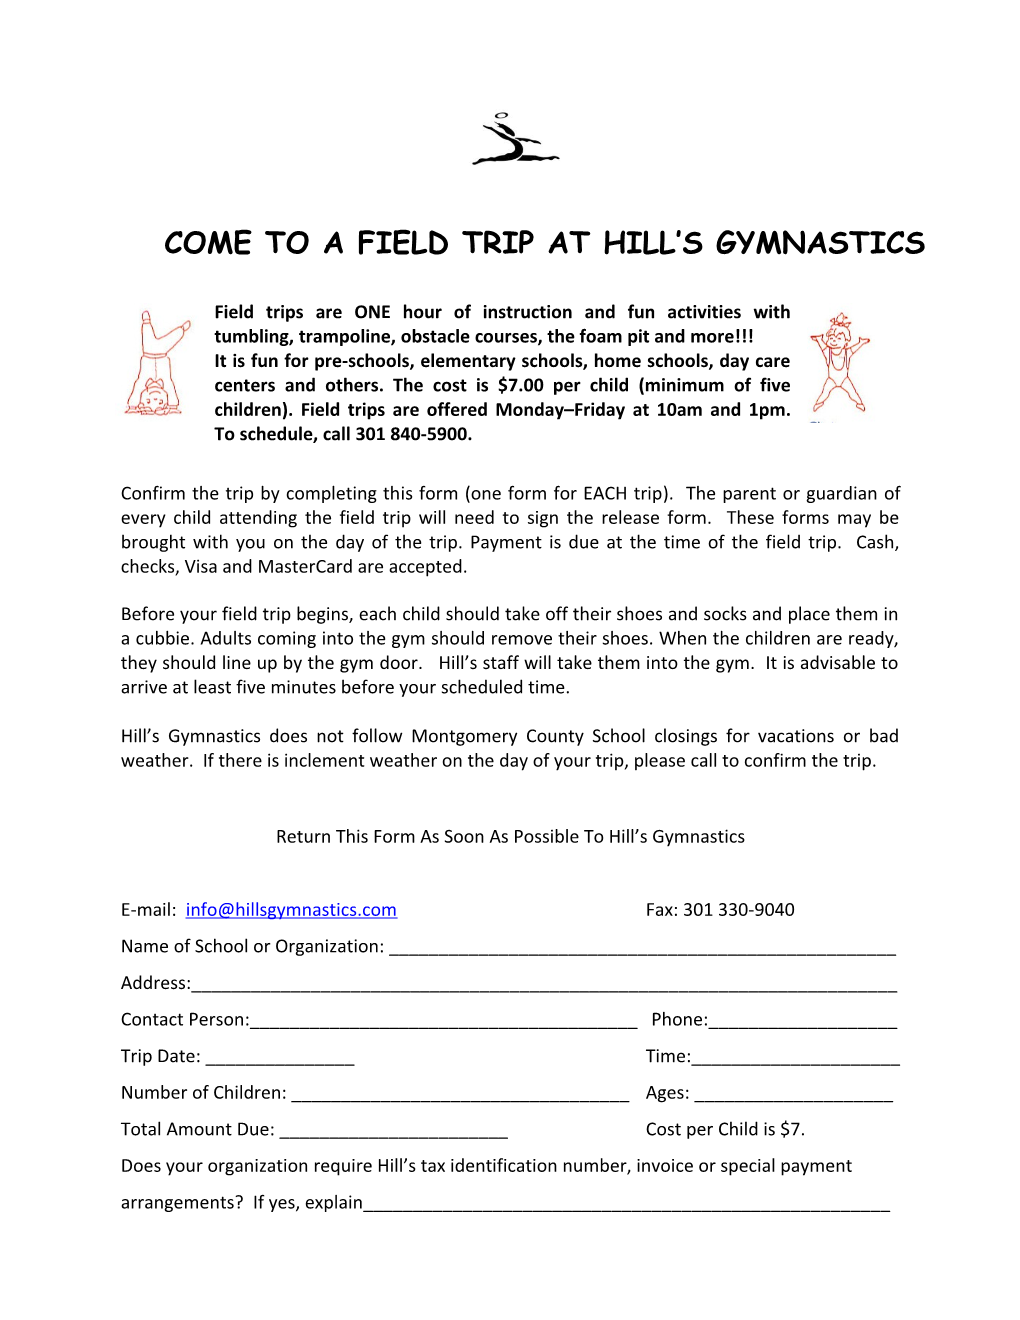 Come to a Field Trip at Hill S Gymnastics